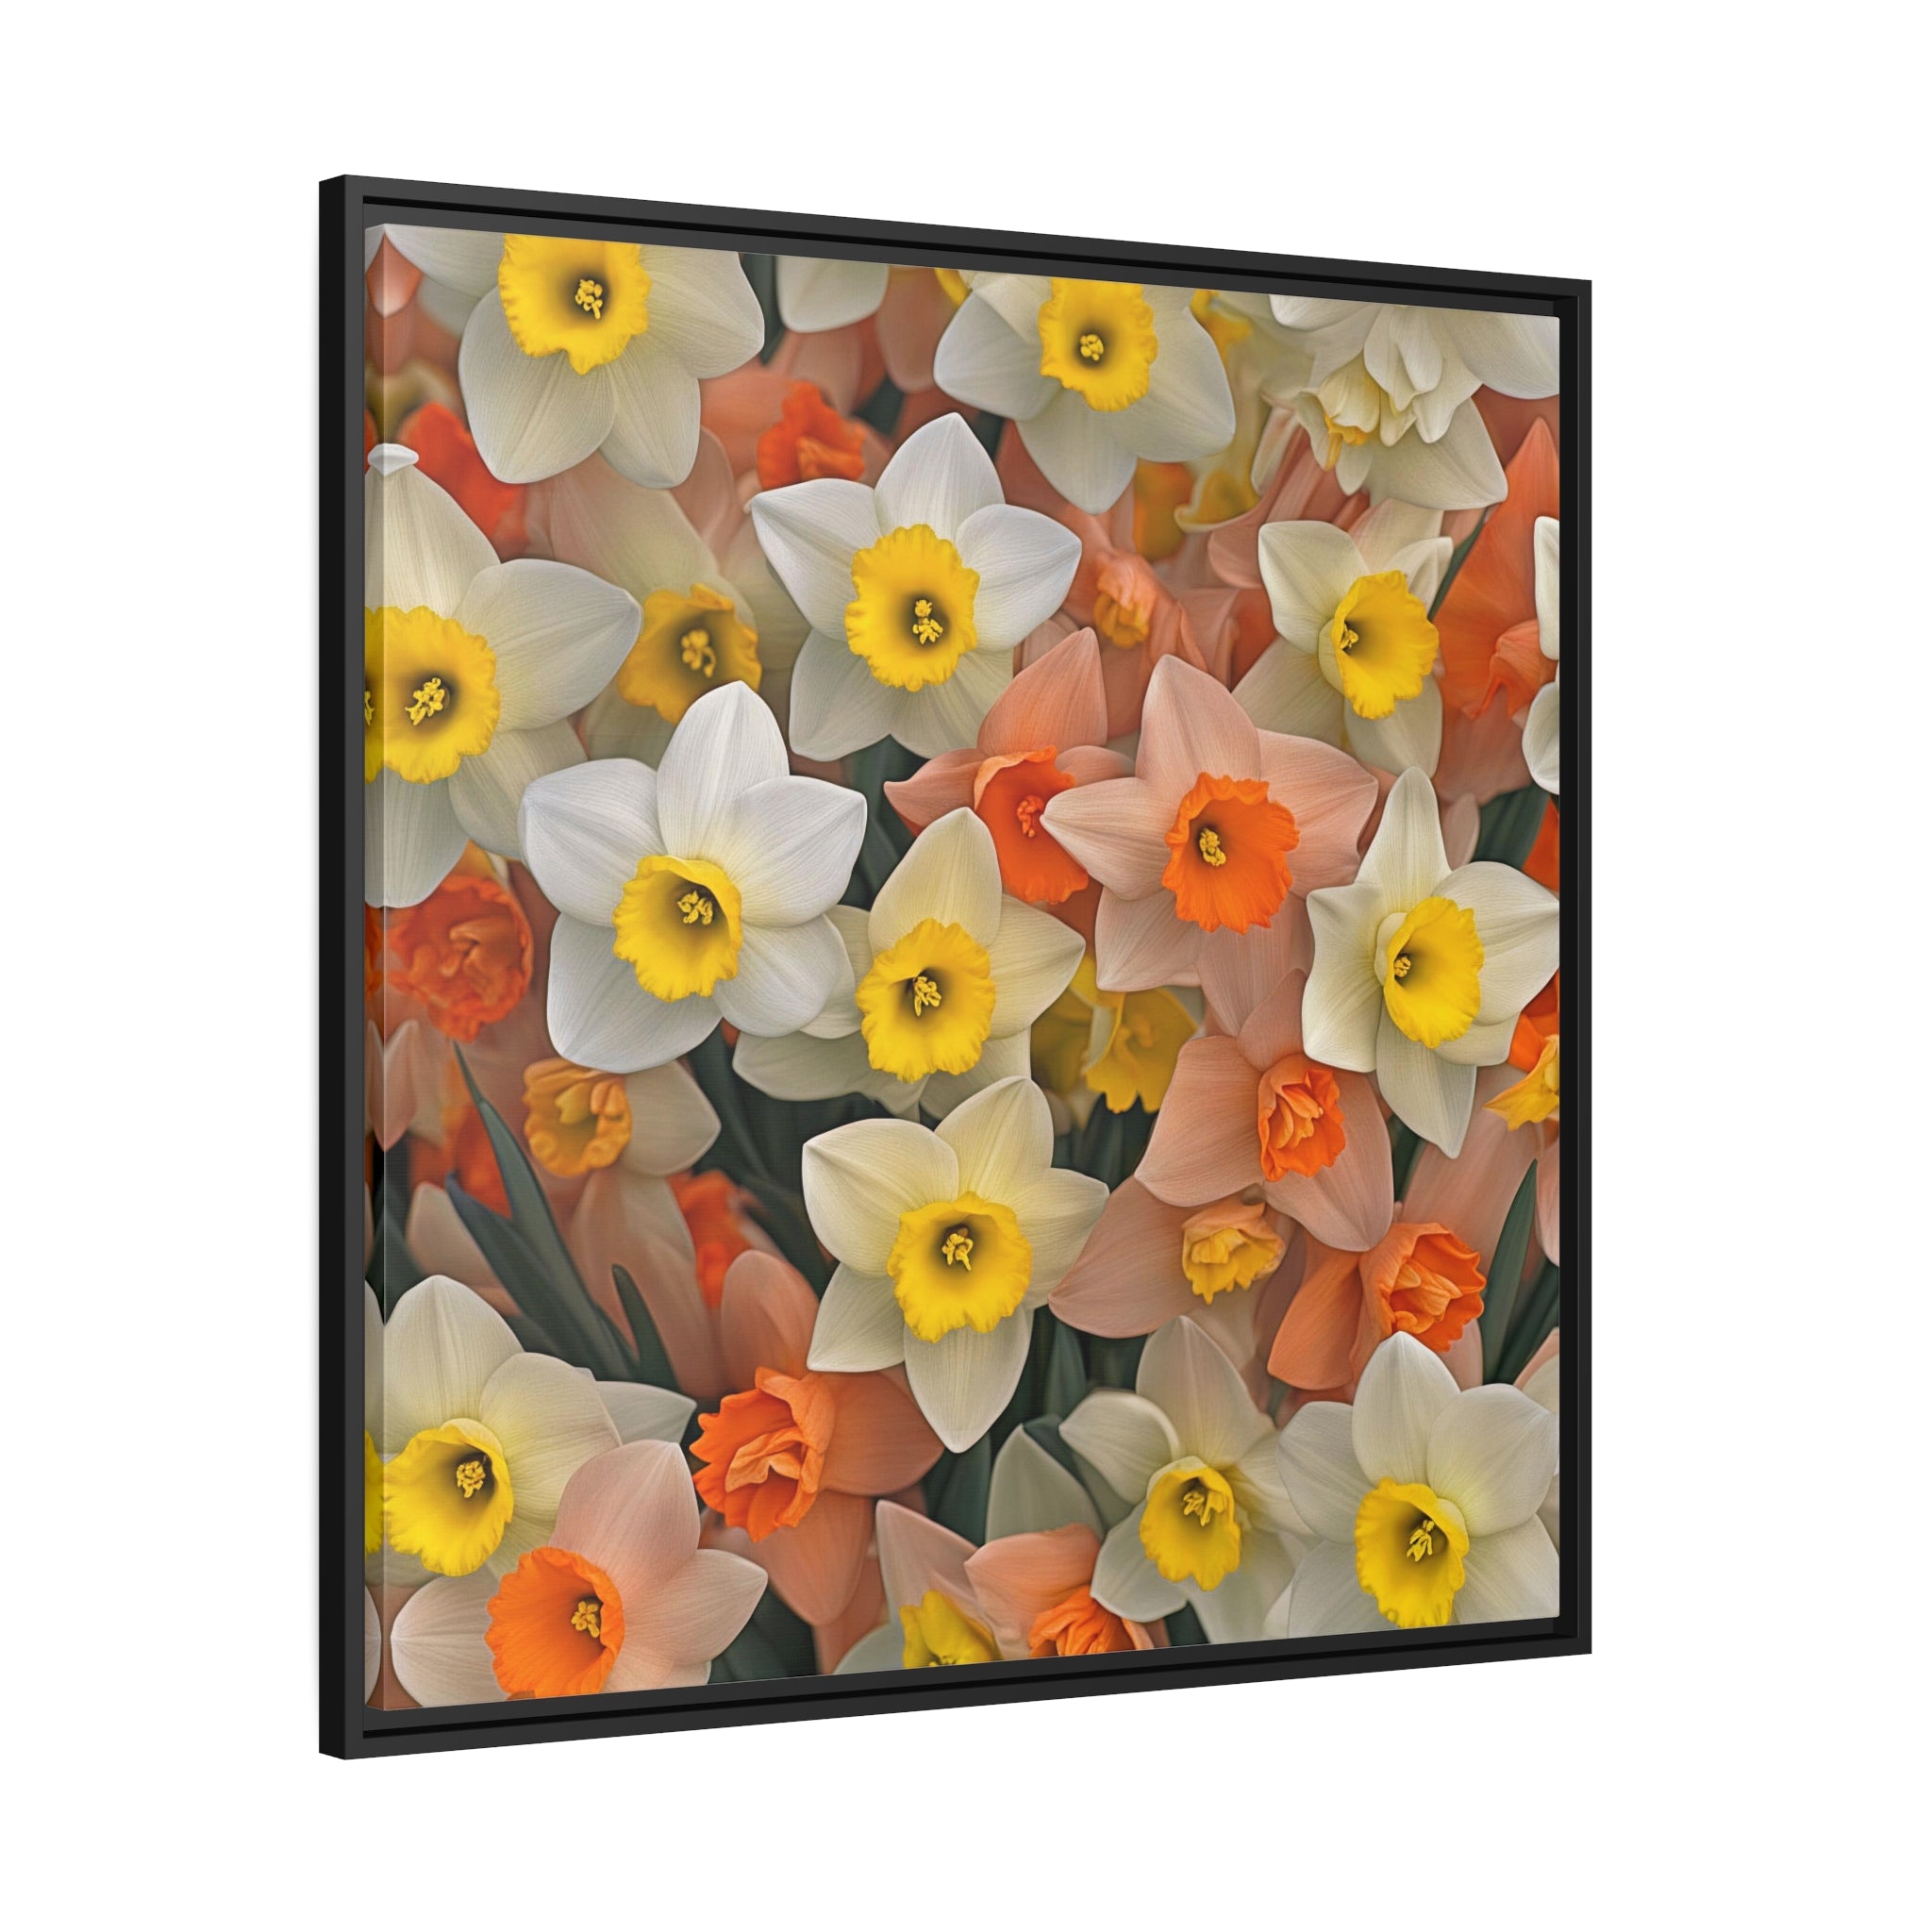 Wall Art DAFFODILS Canvas Print Art Deco Painting Original Giclee 32X32 + Frame Love Flower Minimalist Beauty Fun Design Fit House Office Gift Ready Hang